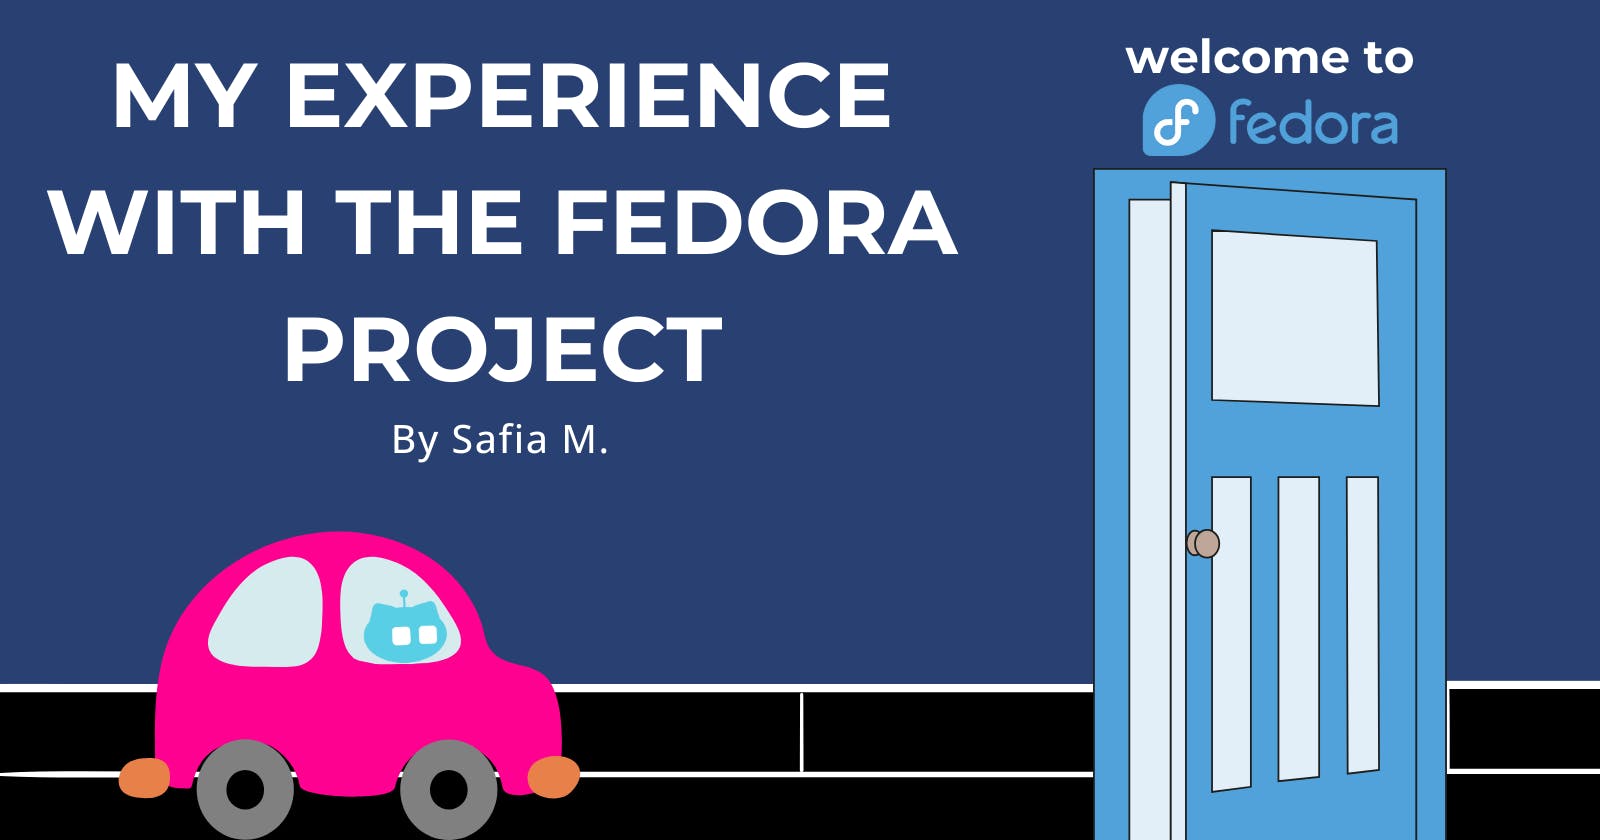 My Experience With The Fedora Project